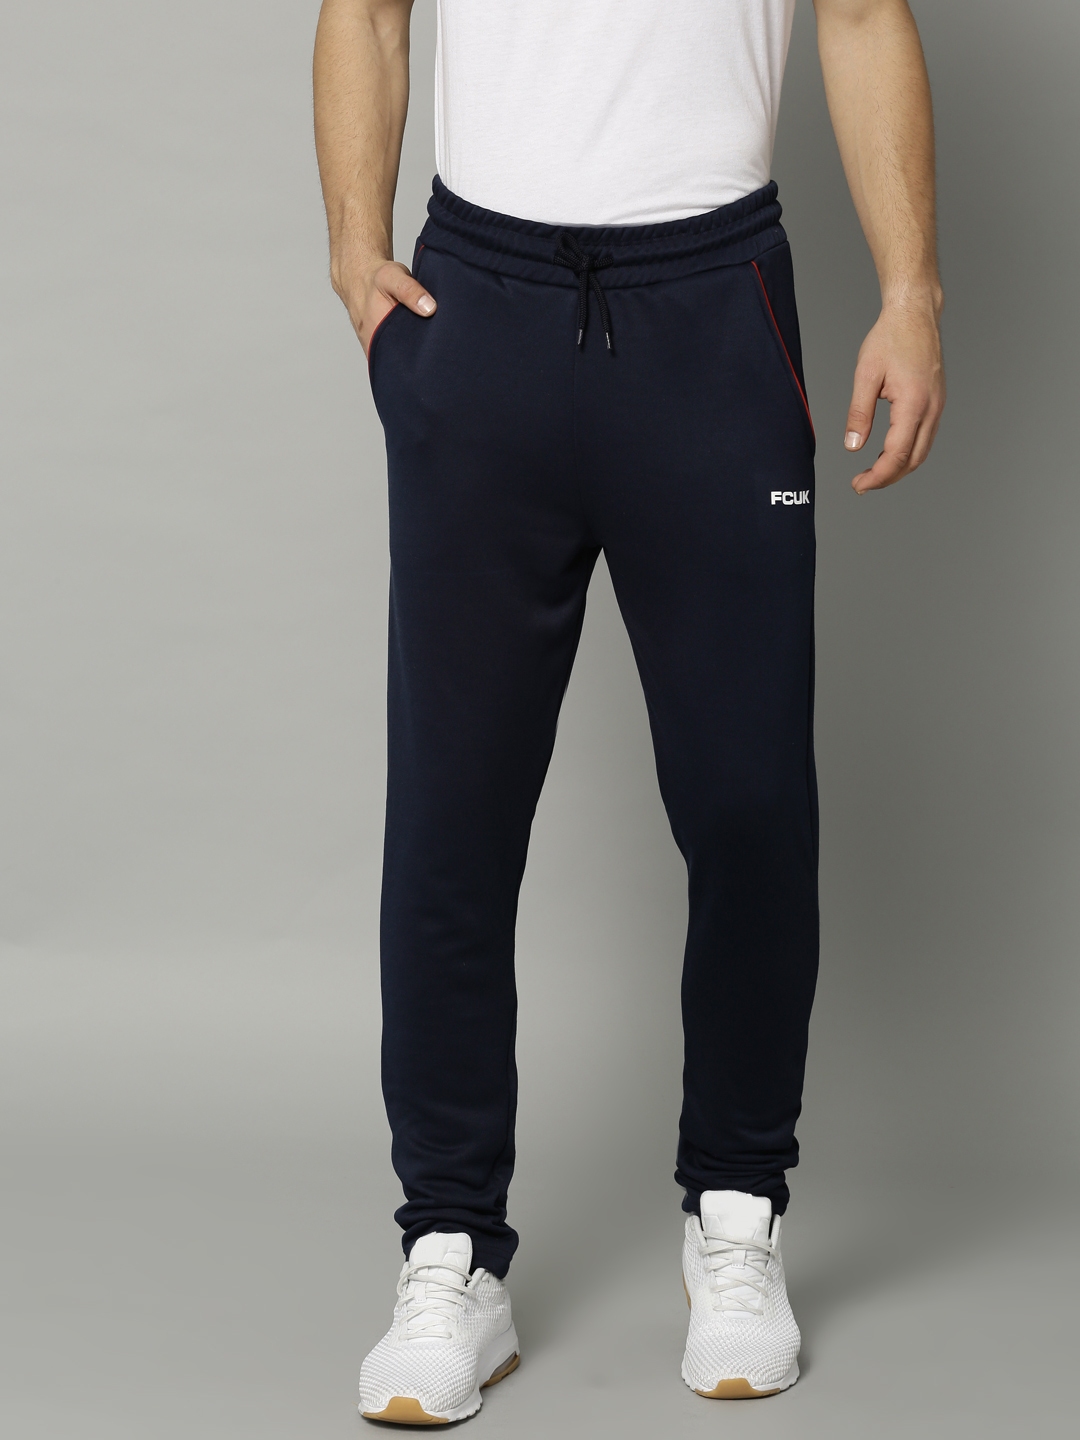 Shop for Bench  Sweat Pants  Mens Sportswear  Sports  Leisure  online  at Lookagain